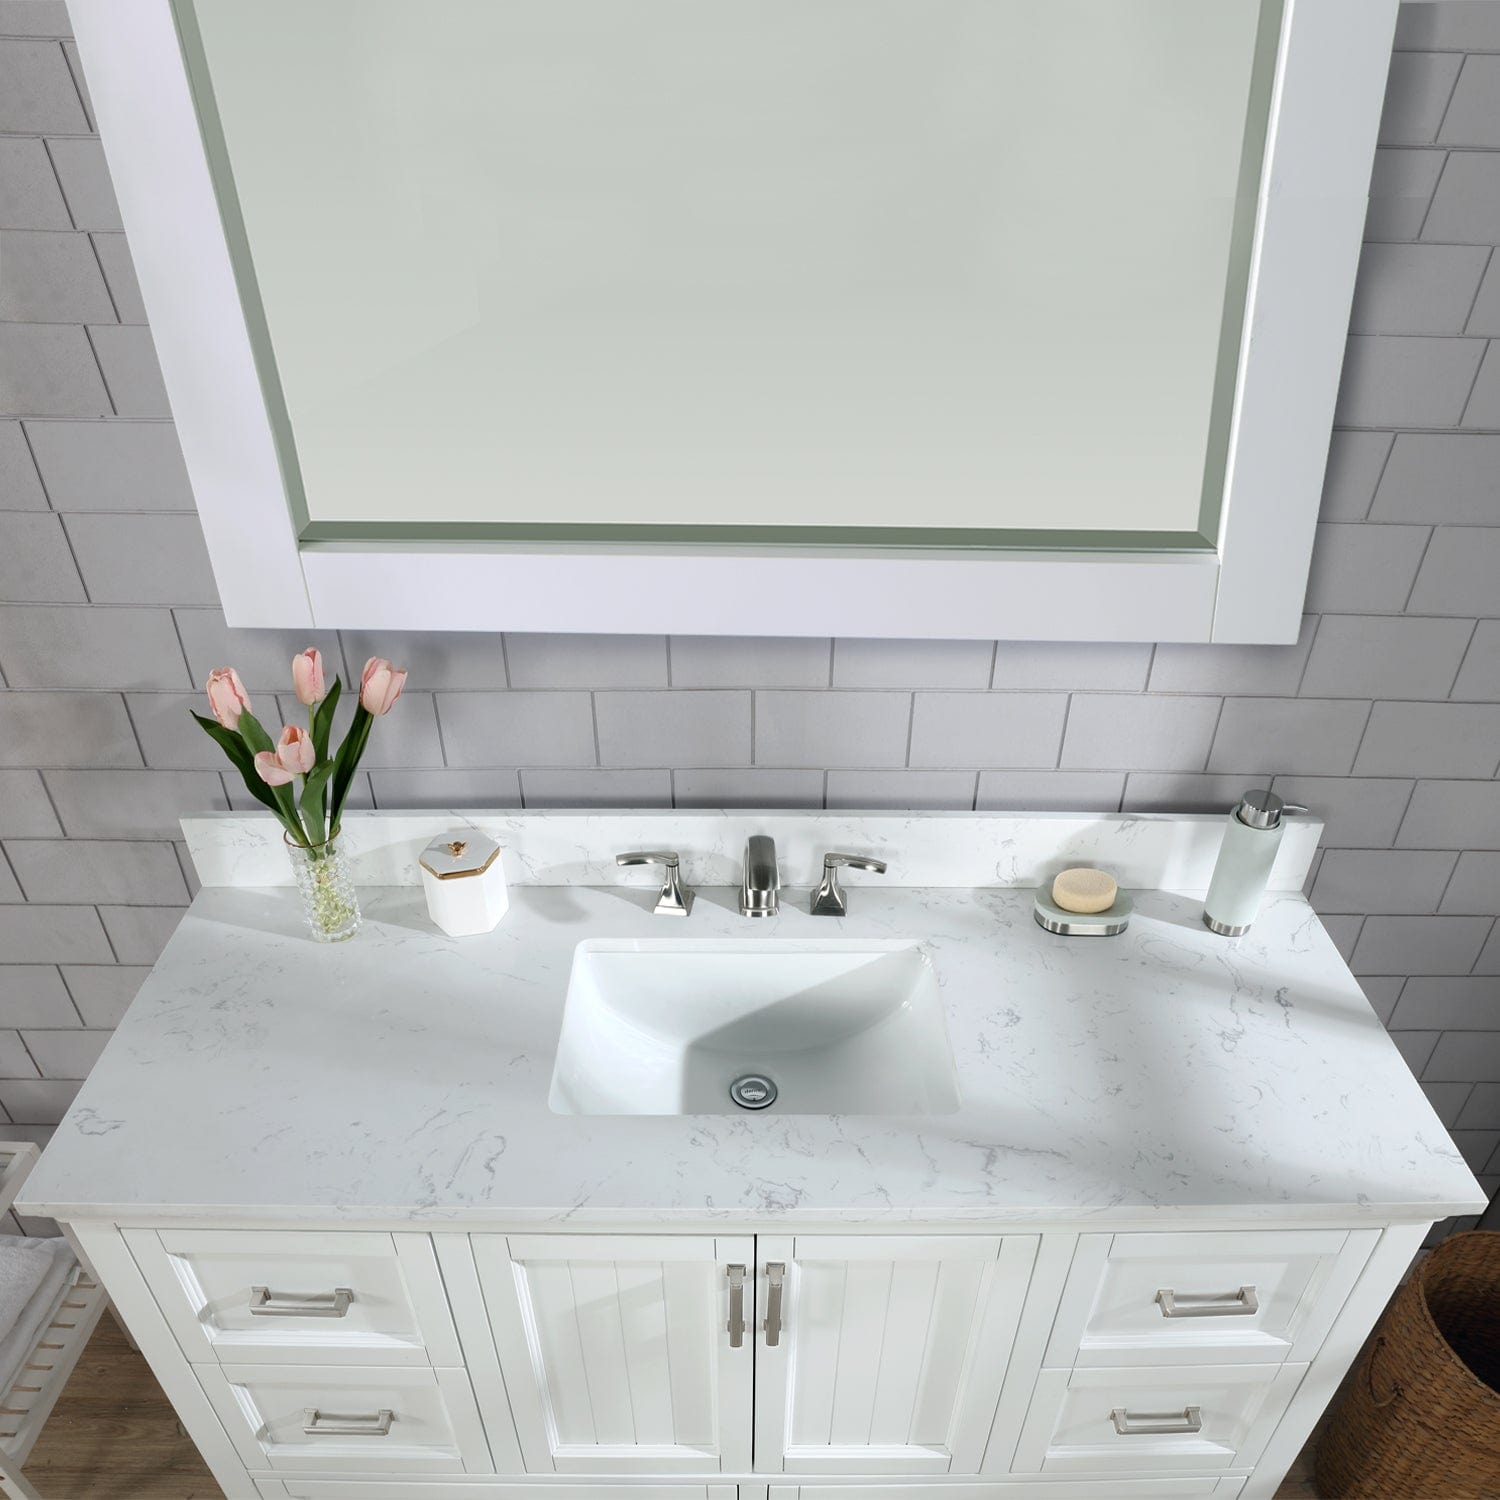 Altair Isla 60" Single Bathroom Vanity Set in White and Carrara White Marble Countertop with Mirror 538060S-WH-AW - Molaix696952511352Vanity538060S-WH-AW